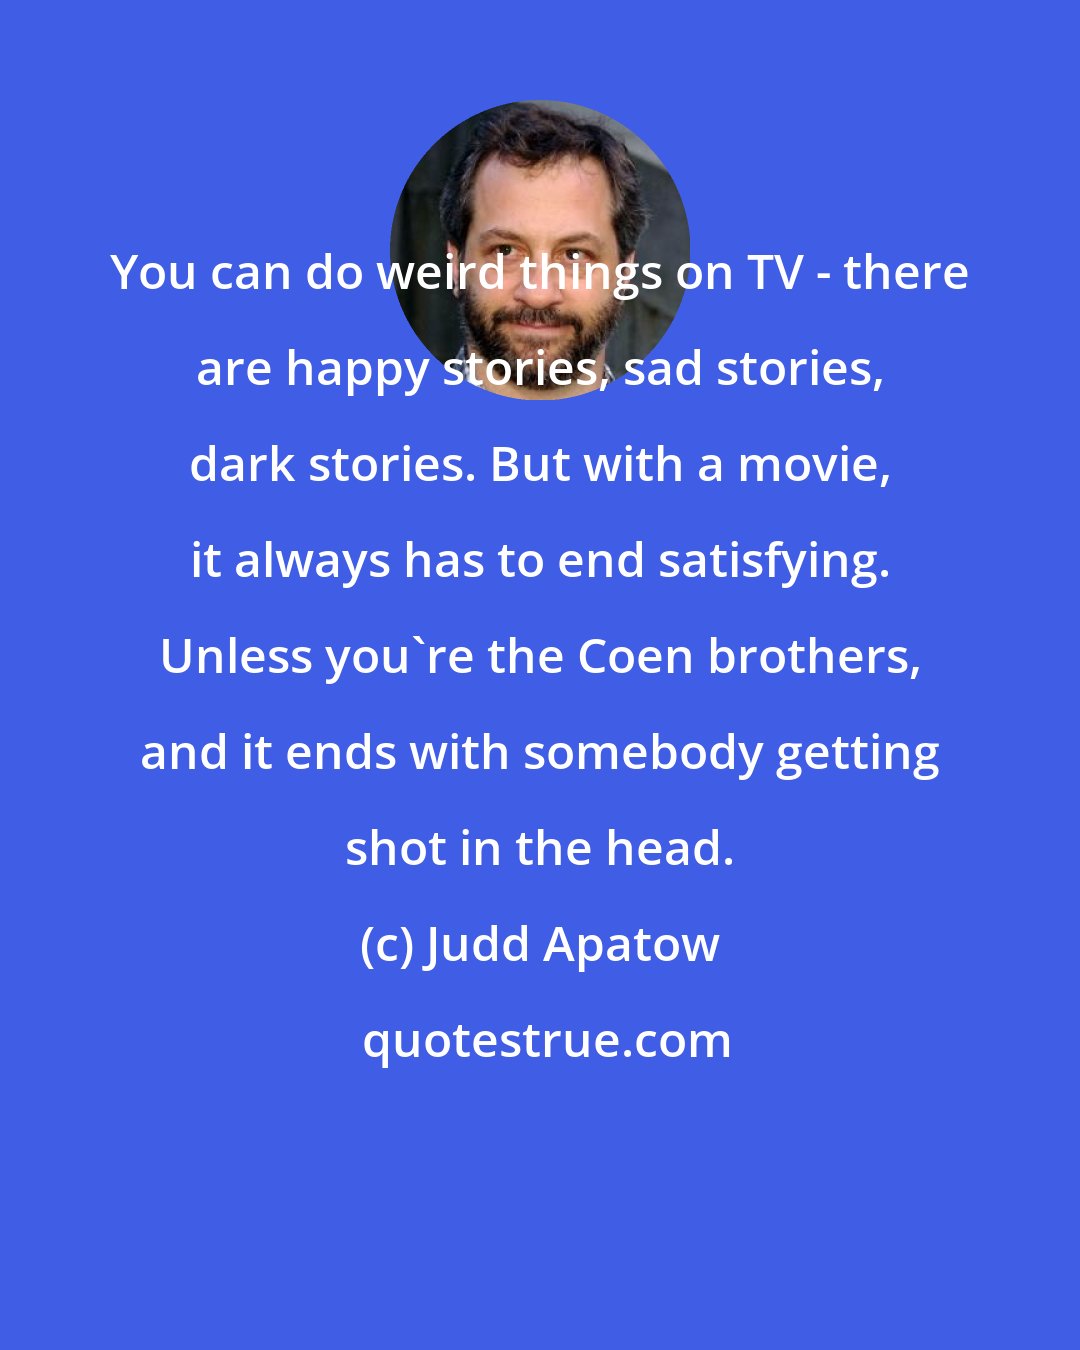 Judd Apatow: You can do weird things on TV - there are happy stories, sad stories, dark stories. But with a movie, it always has to end satisfying. Unless you're the Coen brothers, and it ends with somebody getting shot in the head.